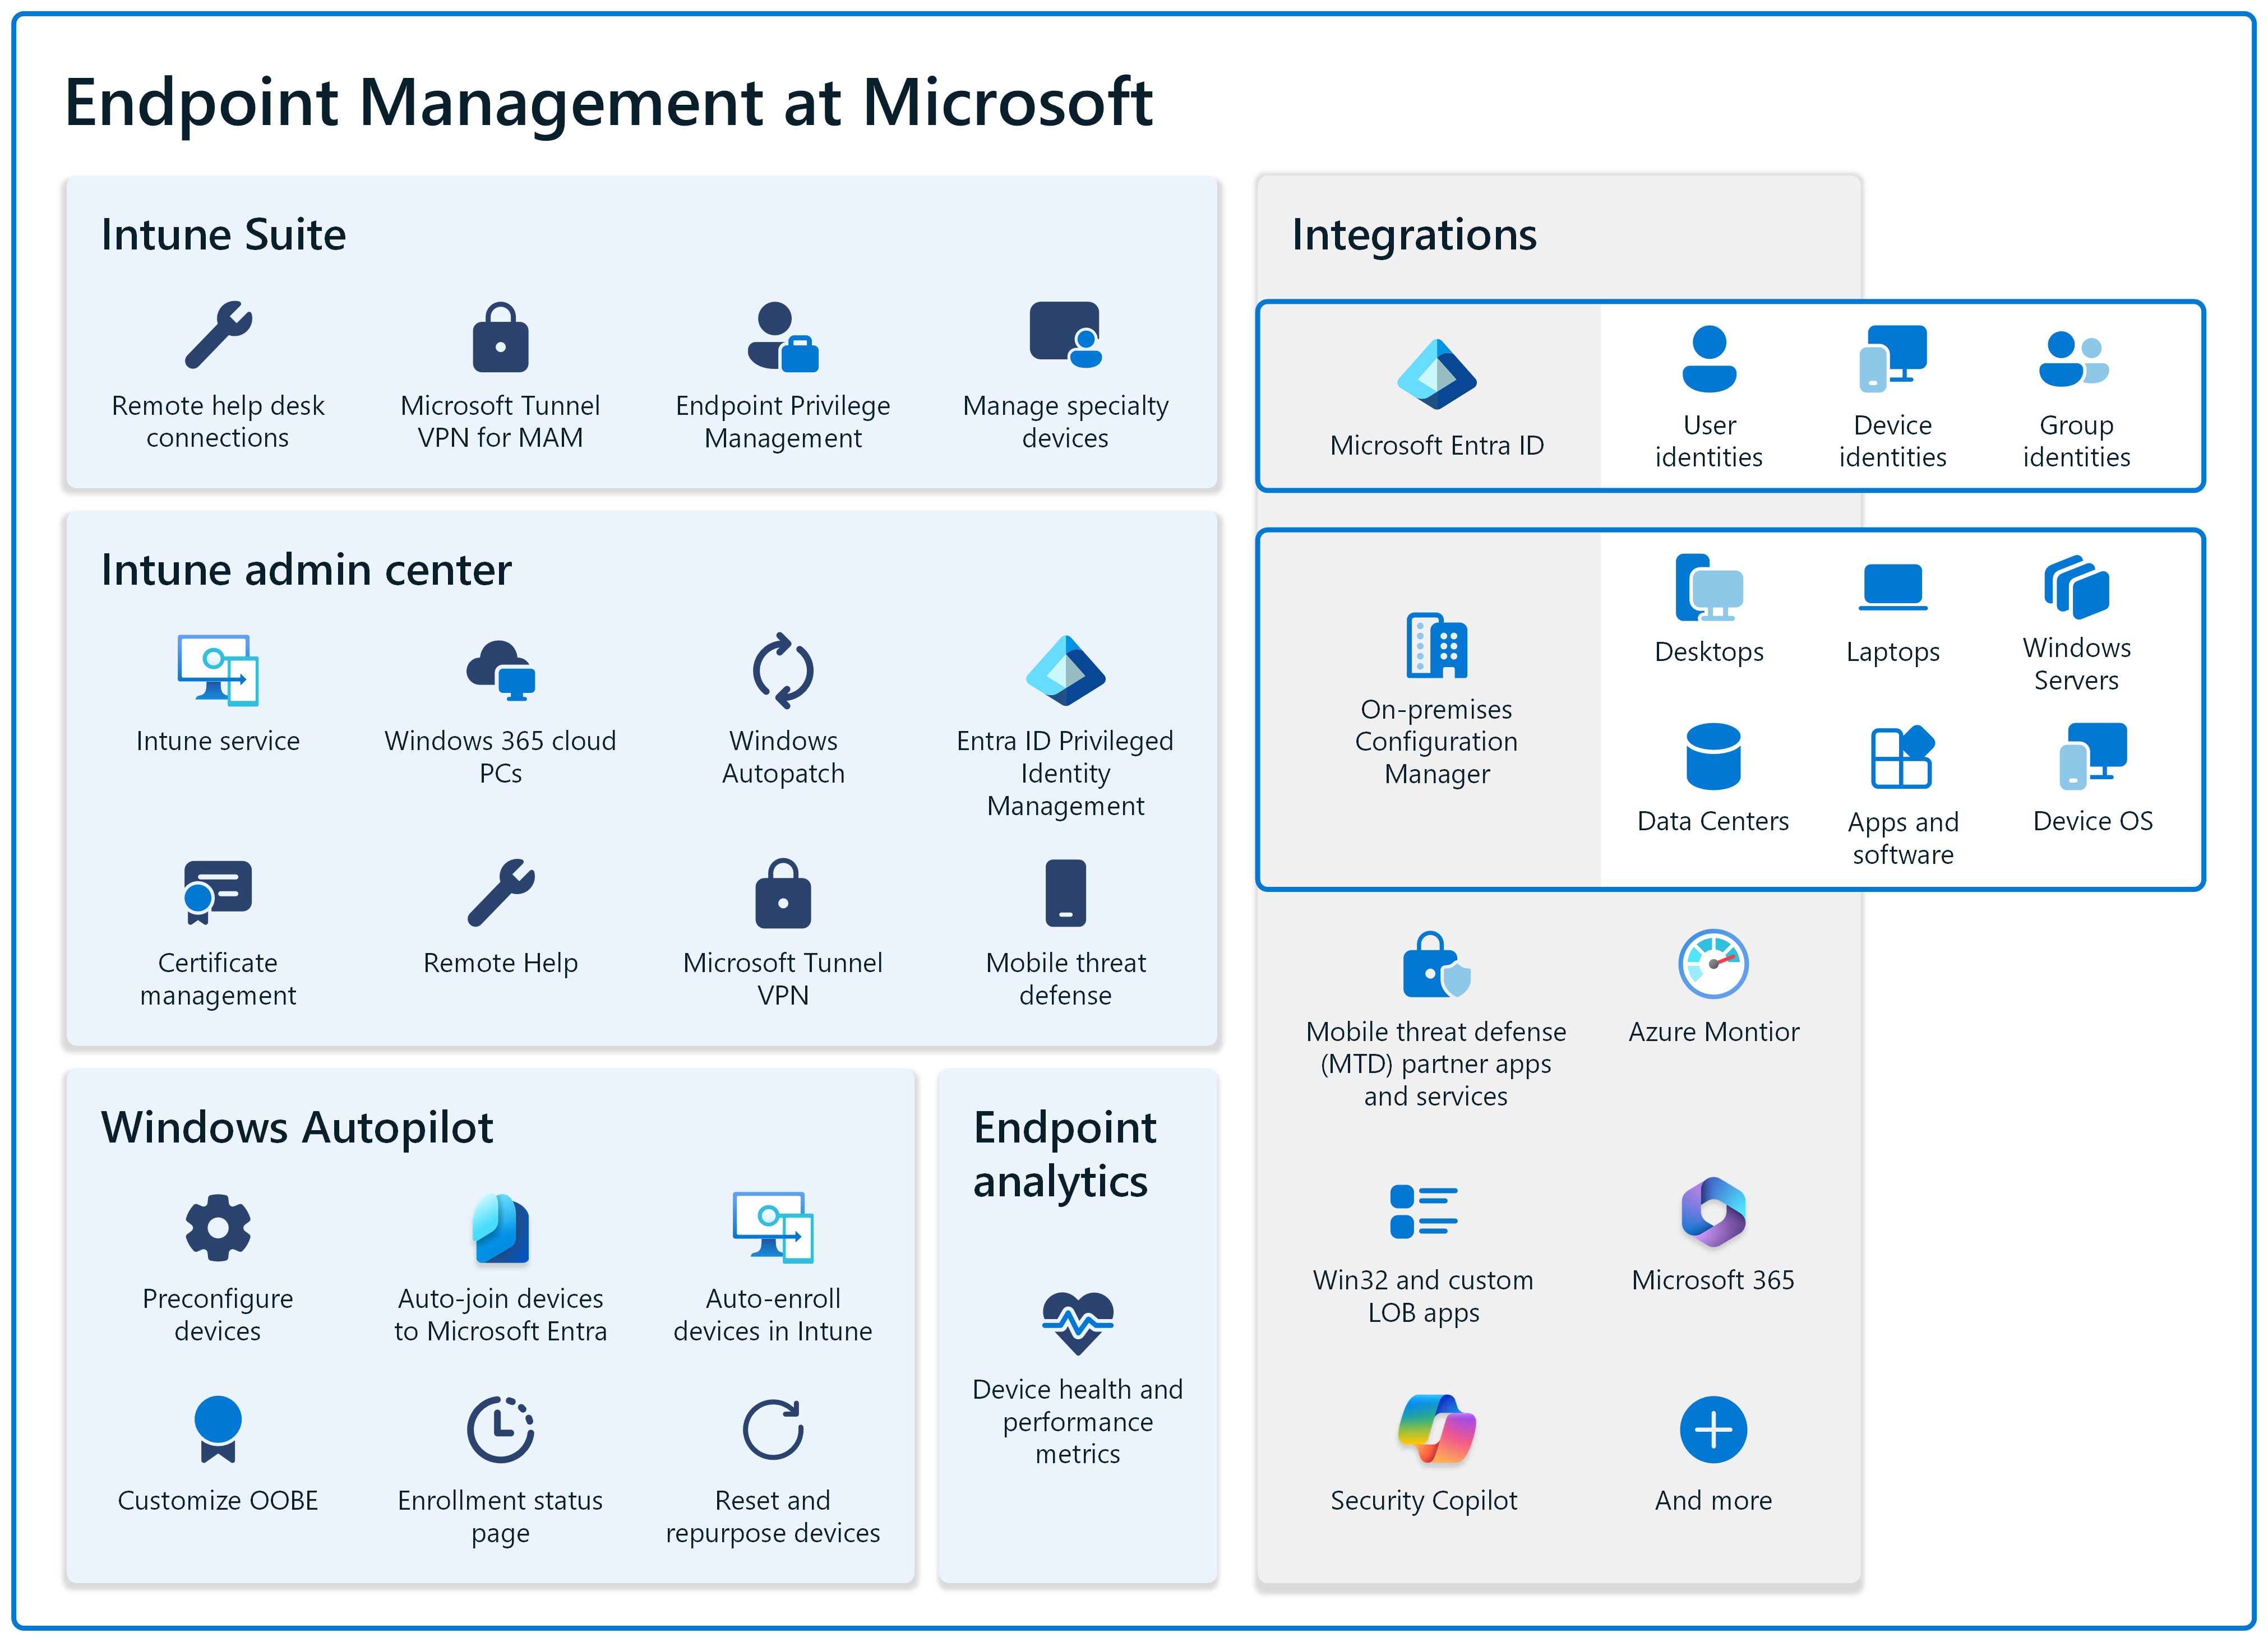 Endpoint management for Microsoft includes Microsoft Intune, Windows Autopilot and Endpoint analytics. It also integrates with Microsoft Entra ID, on-premises Configuration Manager, mobile threat defense partners, Security Copilot, Microsoft 365 apps and more.